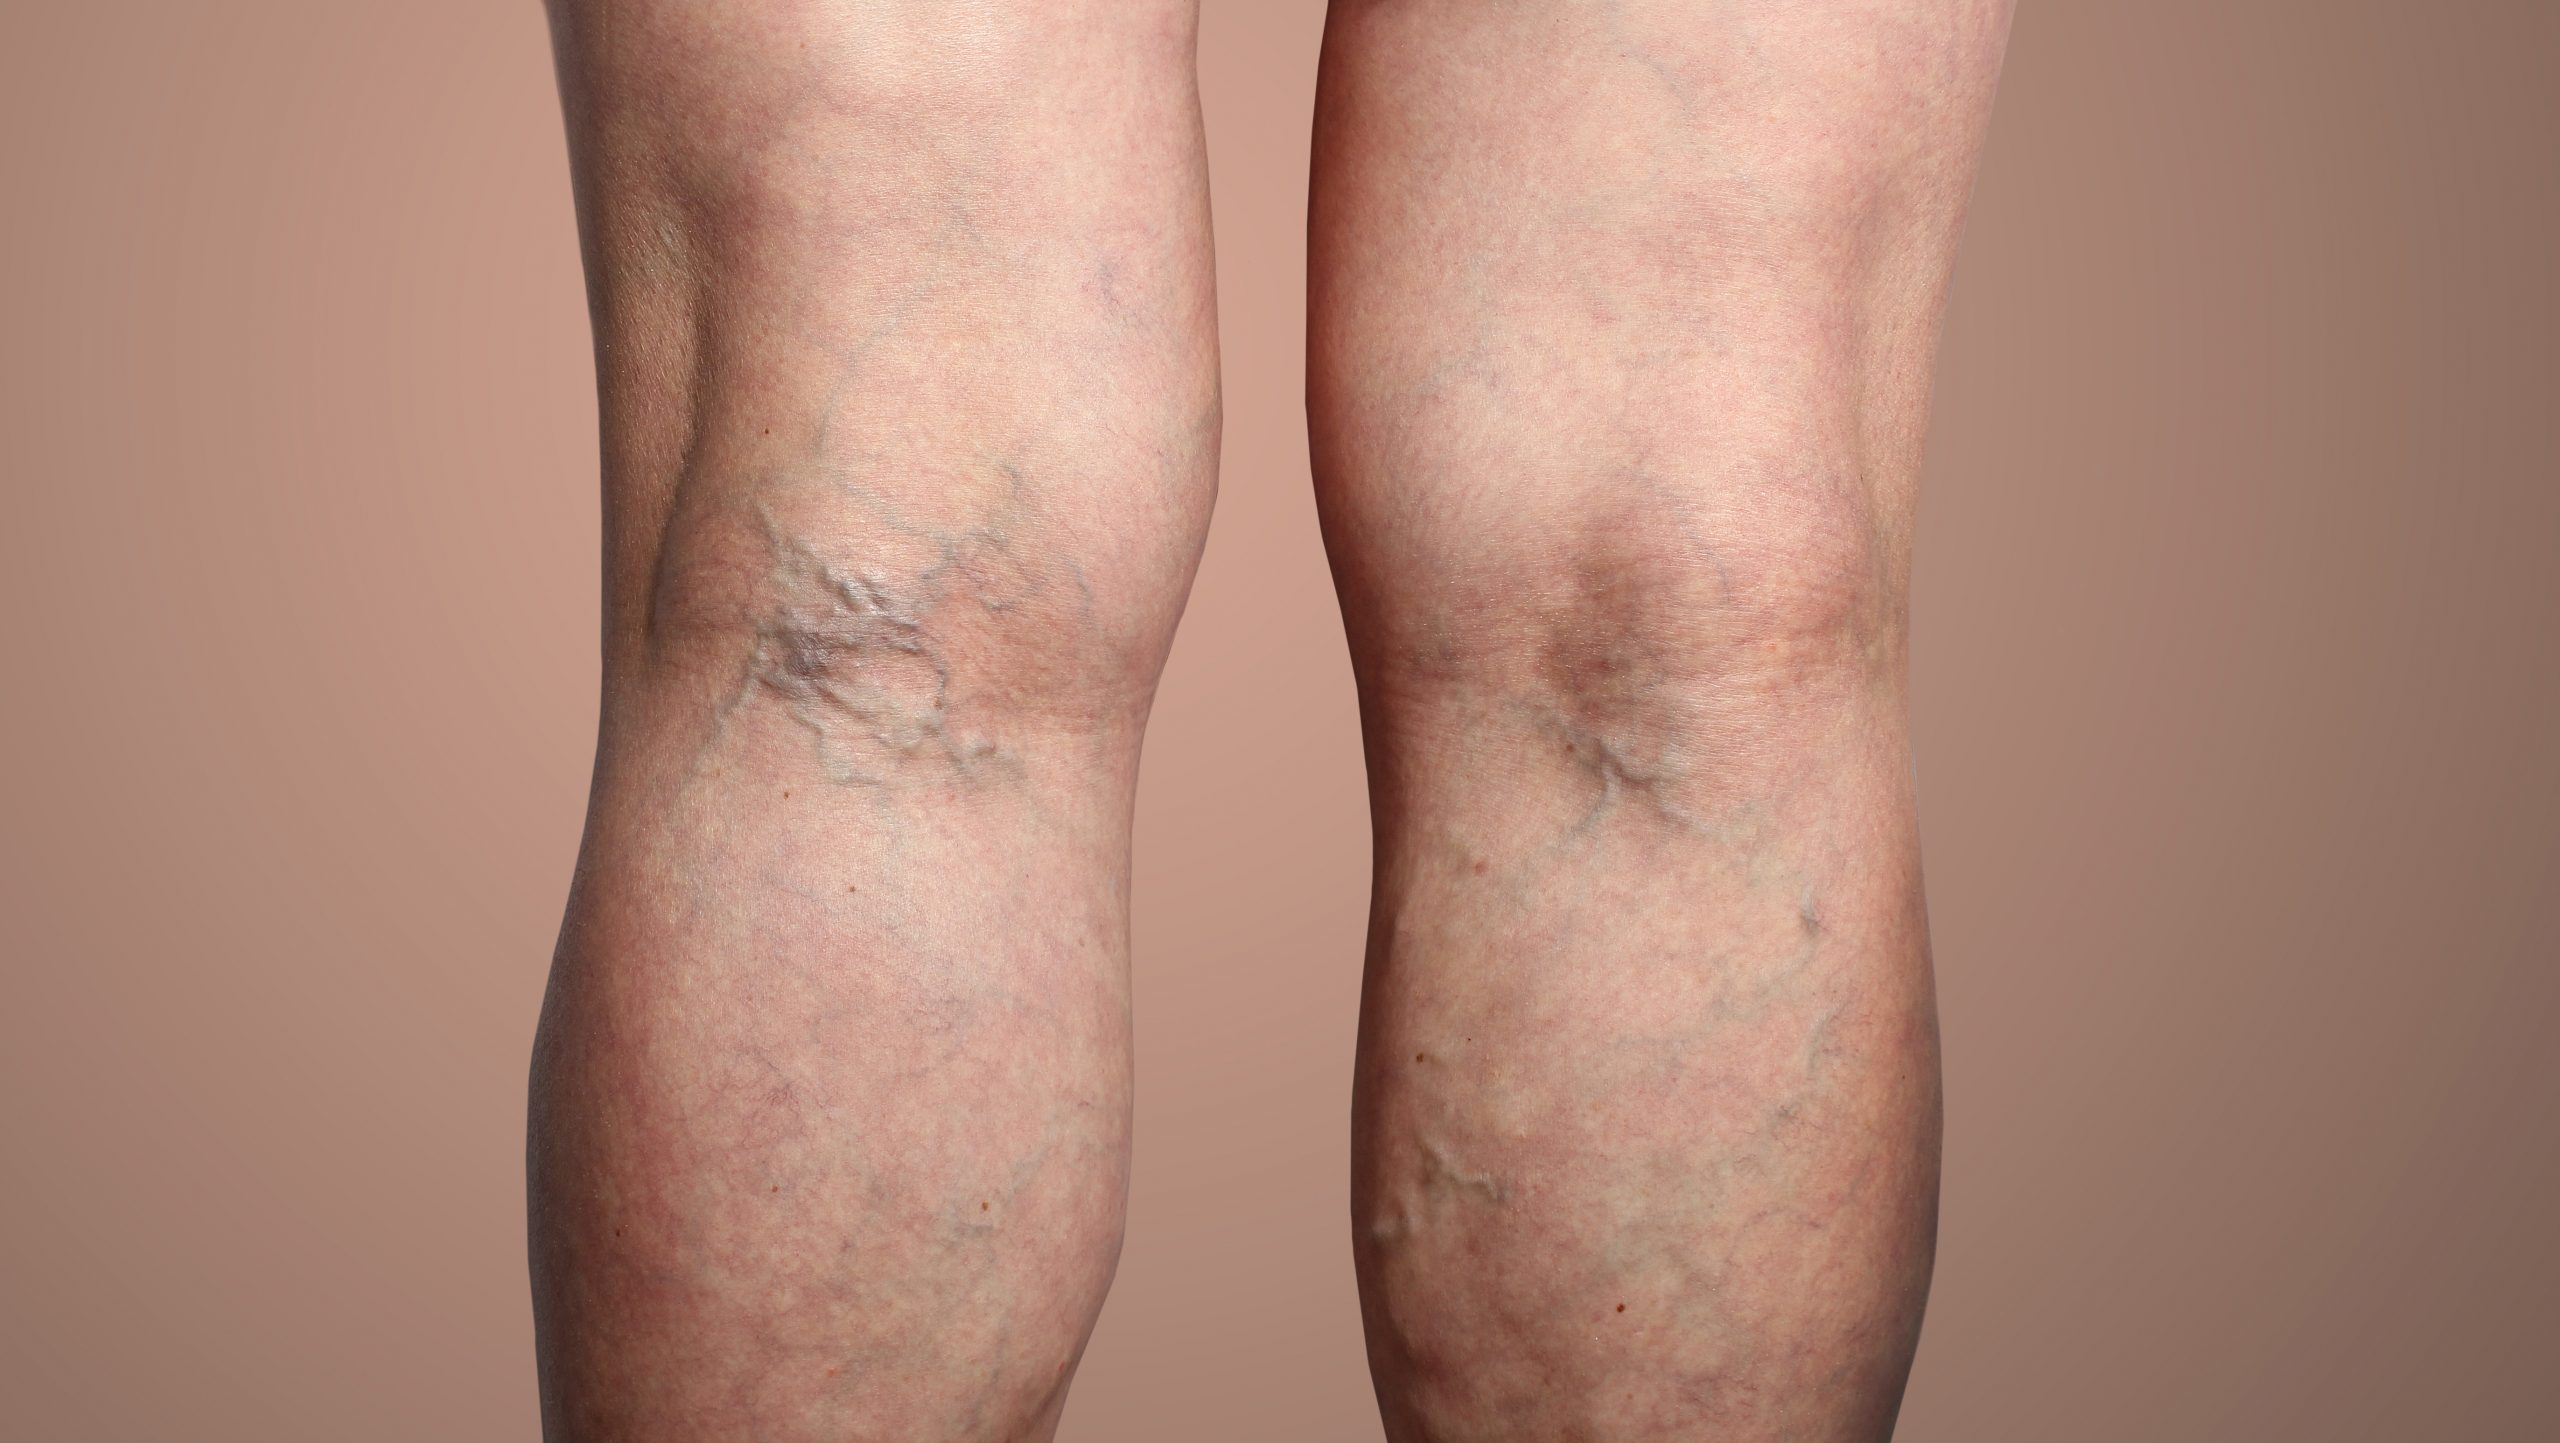 Are Varicose Veins Dangerous? What Are The Symptoms & Treatments?